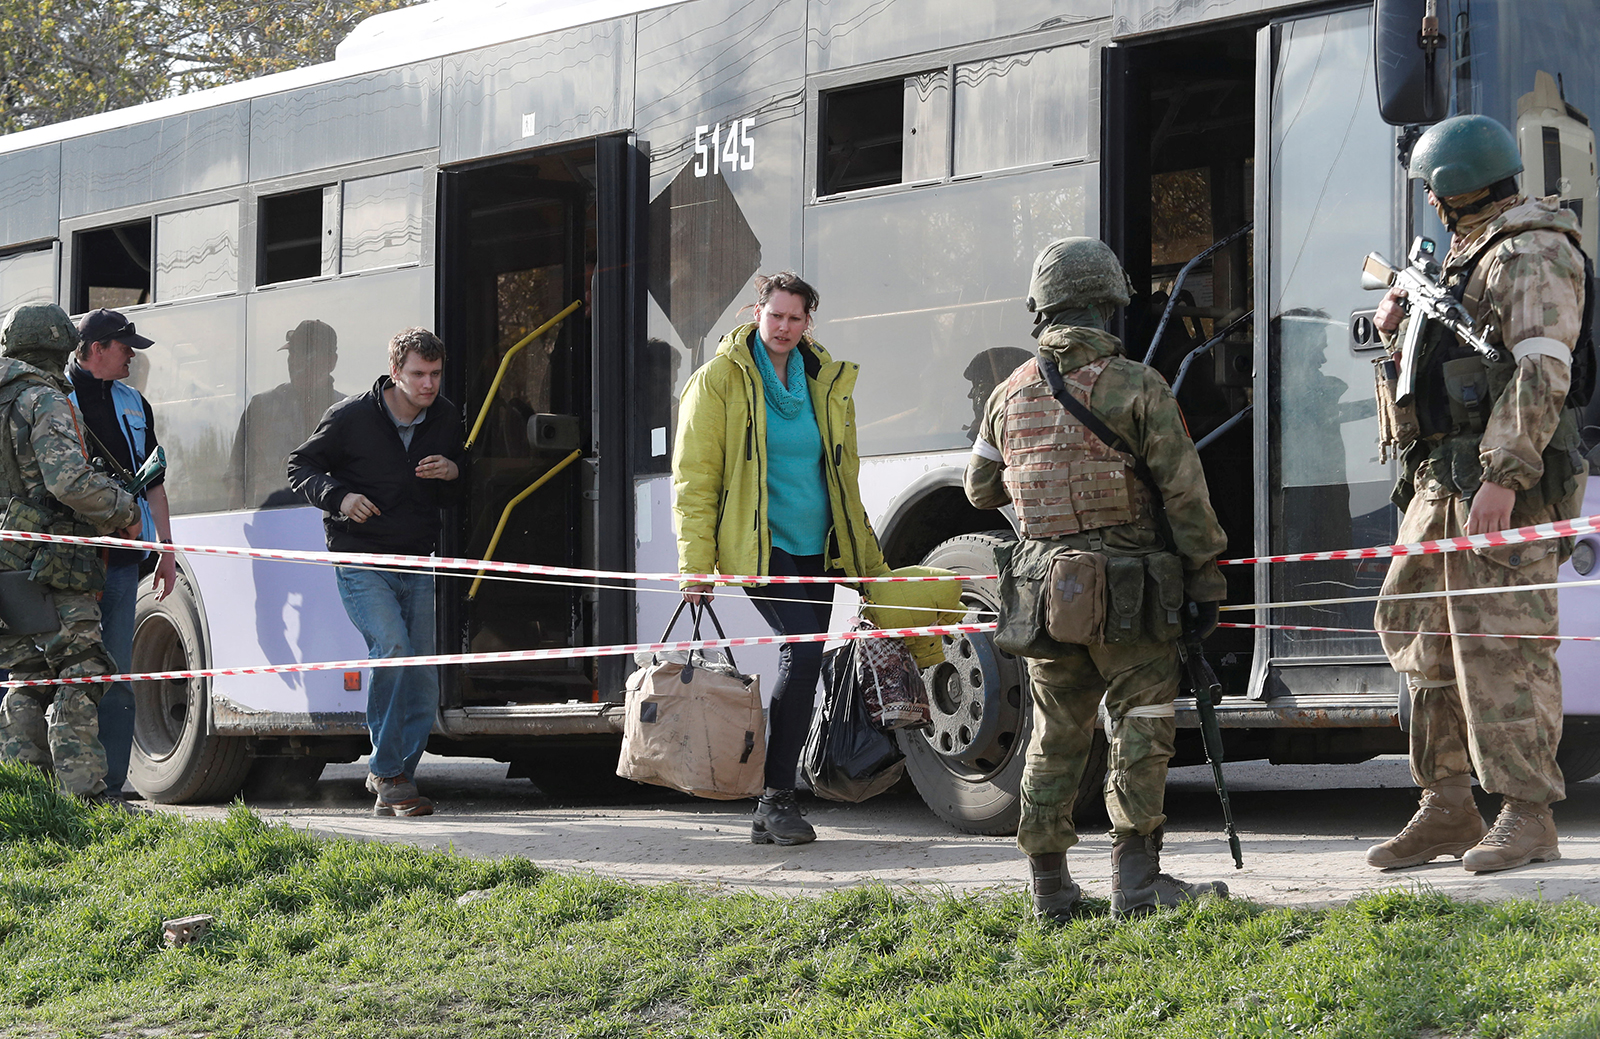 Natalia Usmanova, a 37-year-old employee of the Azovstal steel plant who was evacuated from Mariupol, arrived at a temporary accommodation center during the Ukraine-Russia conflict in the village of Bizimeny in Donetsk region, Ukraine on May 1.